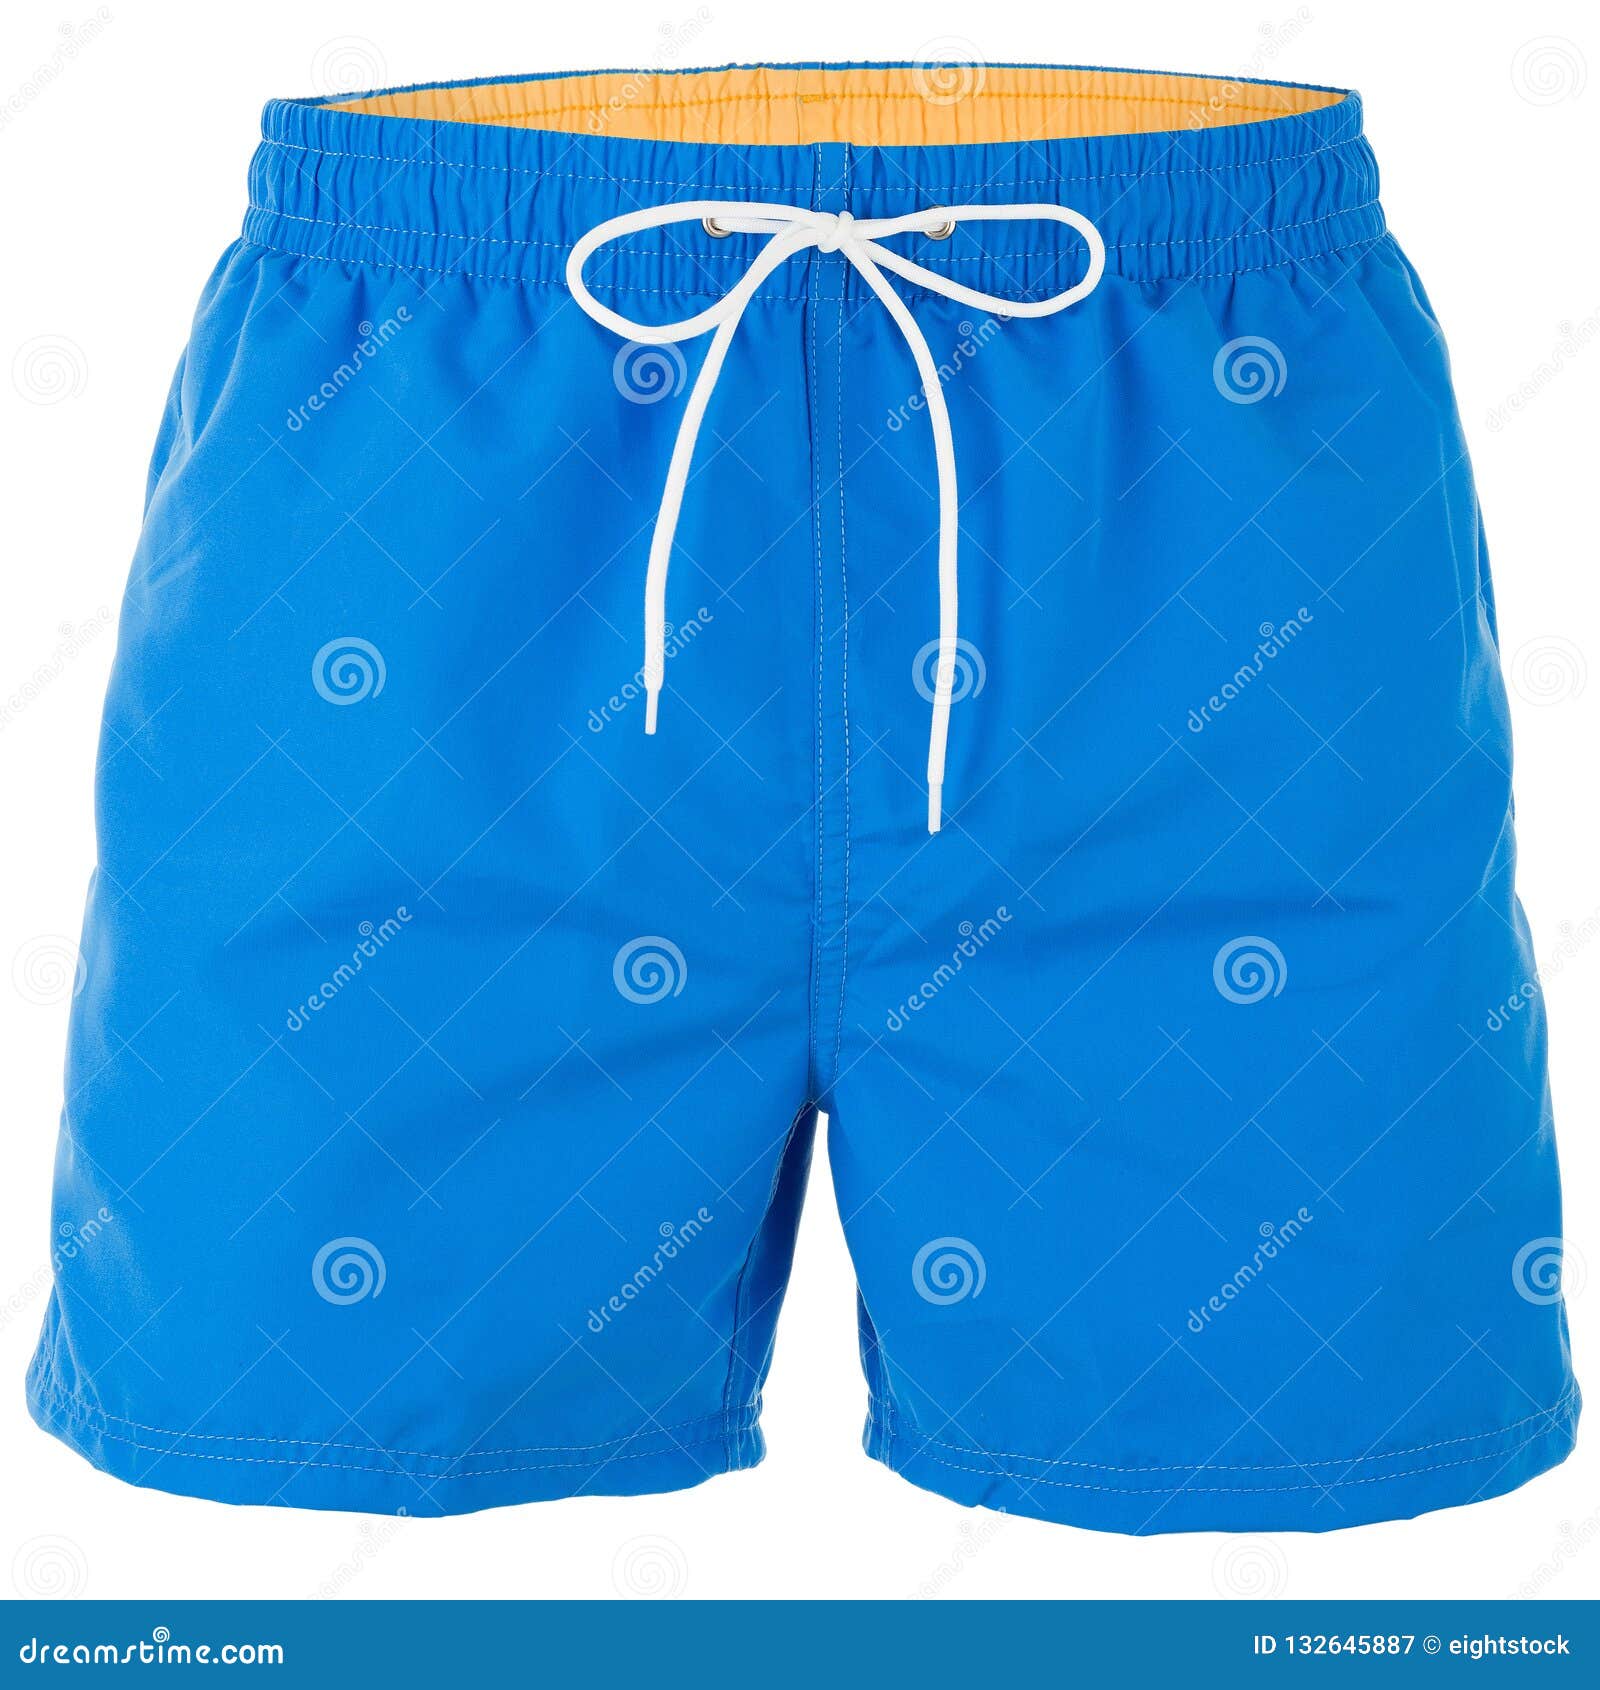 Blue and Yellow Men Shorts for Swimming Stock Image - Image of ...